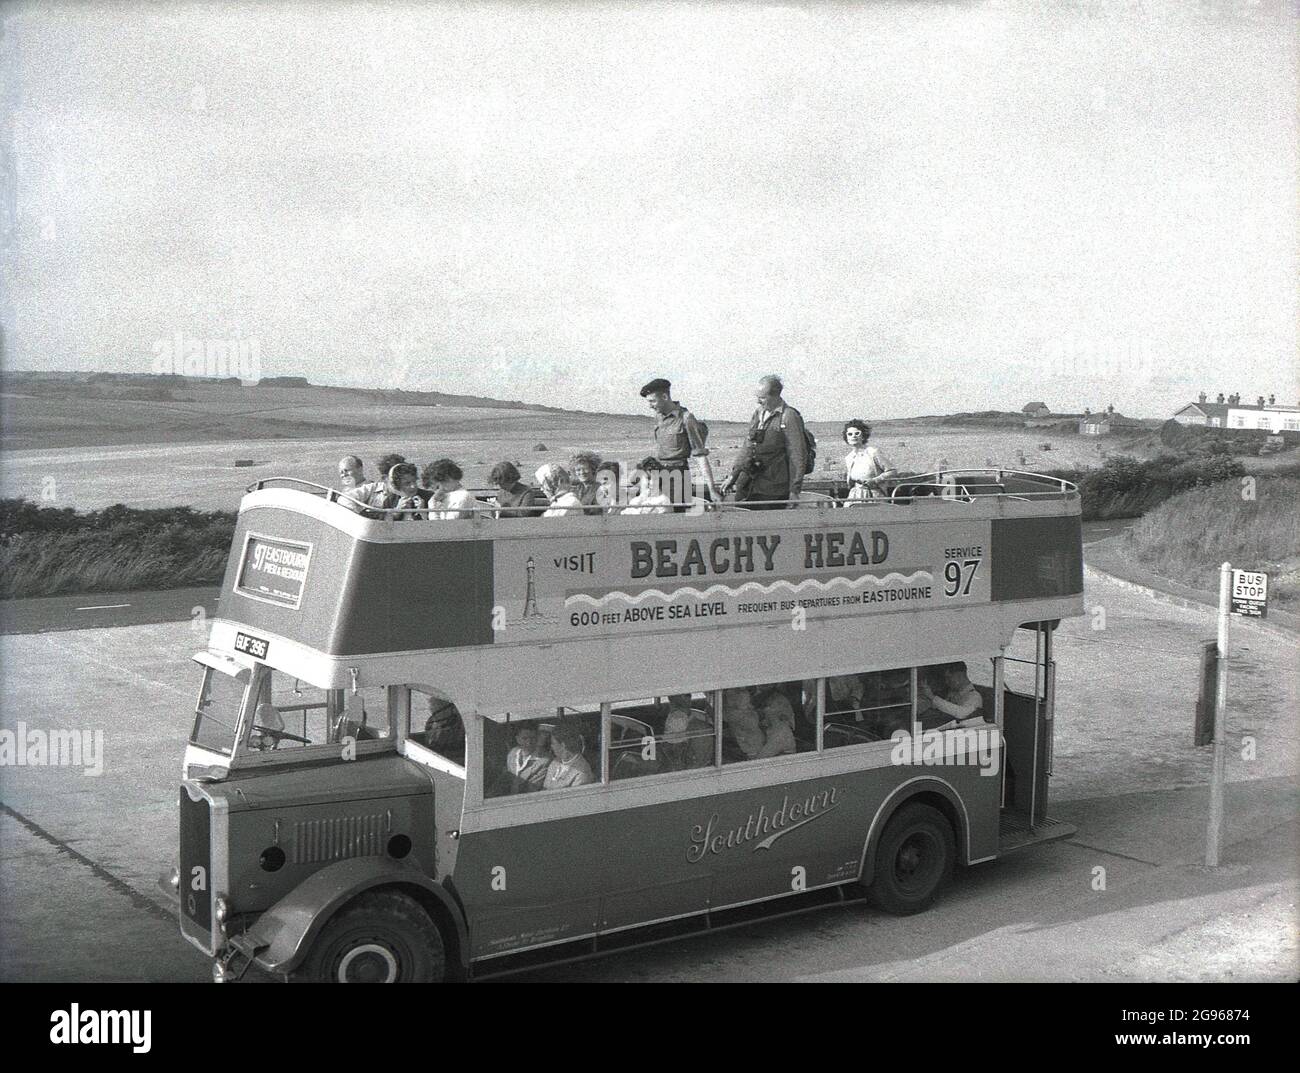 1950s, 'Visit Beachy Head'....people on an open-top double decker bus, a utility Guy Arab, service 97, parked at Beachy Head, a headland on the South Downs at Eastbourne, East Sussex. The highest chalk sea cliff in Britain, it's surrounding undulating downs are a famous spot for pleasure walking, with views over the English Channel. An area of outstanding natural beauty, in 1929, the land was purchased to safeguard its use for future generations. Southdown Motors operated the Route 97 from Royal Parade, Eastbourne, to the top of Beachy Head, a service for daytrippers which dates back to WW1. Stock Photo